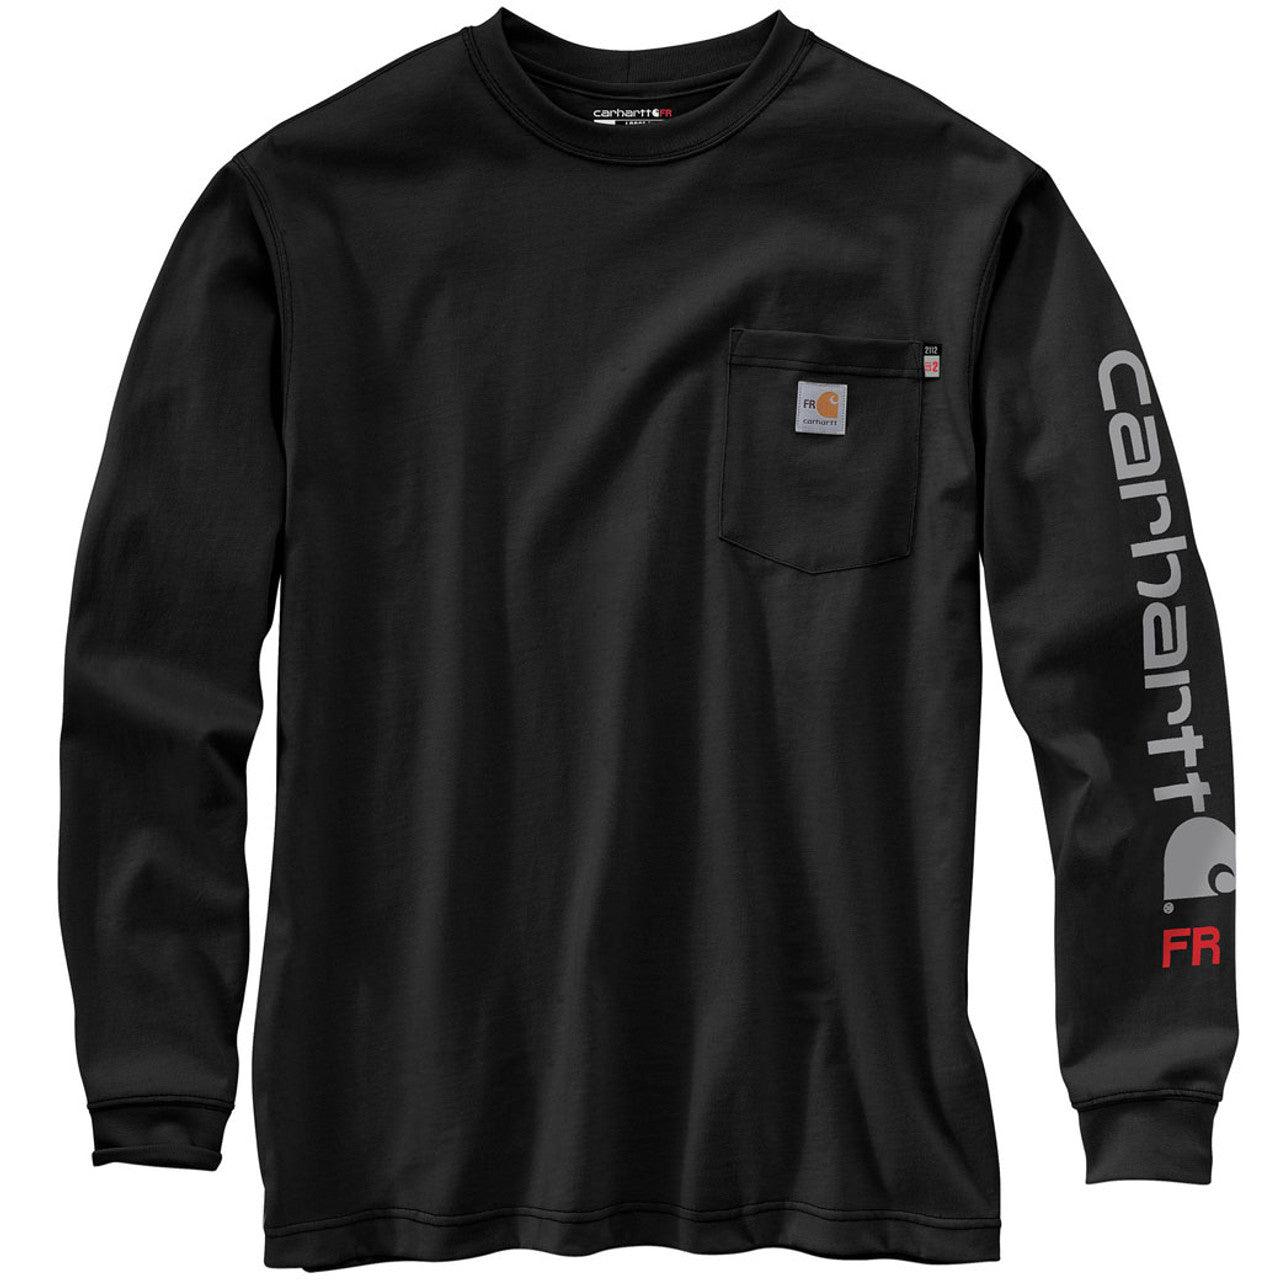 FR Force Lightweight Long Sleeve Graphic T-Shirt - Black Heather - Purpose-Built / Home of the Trades